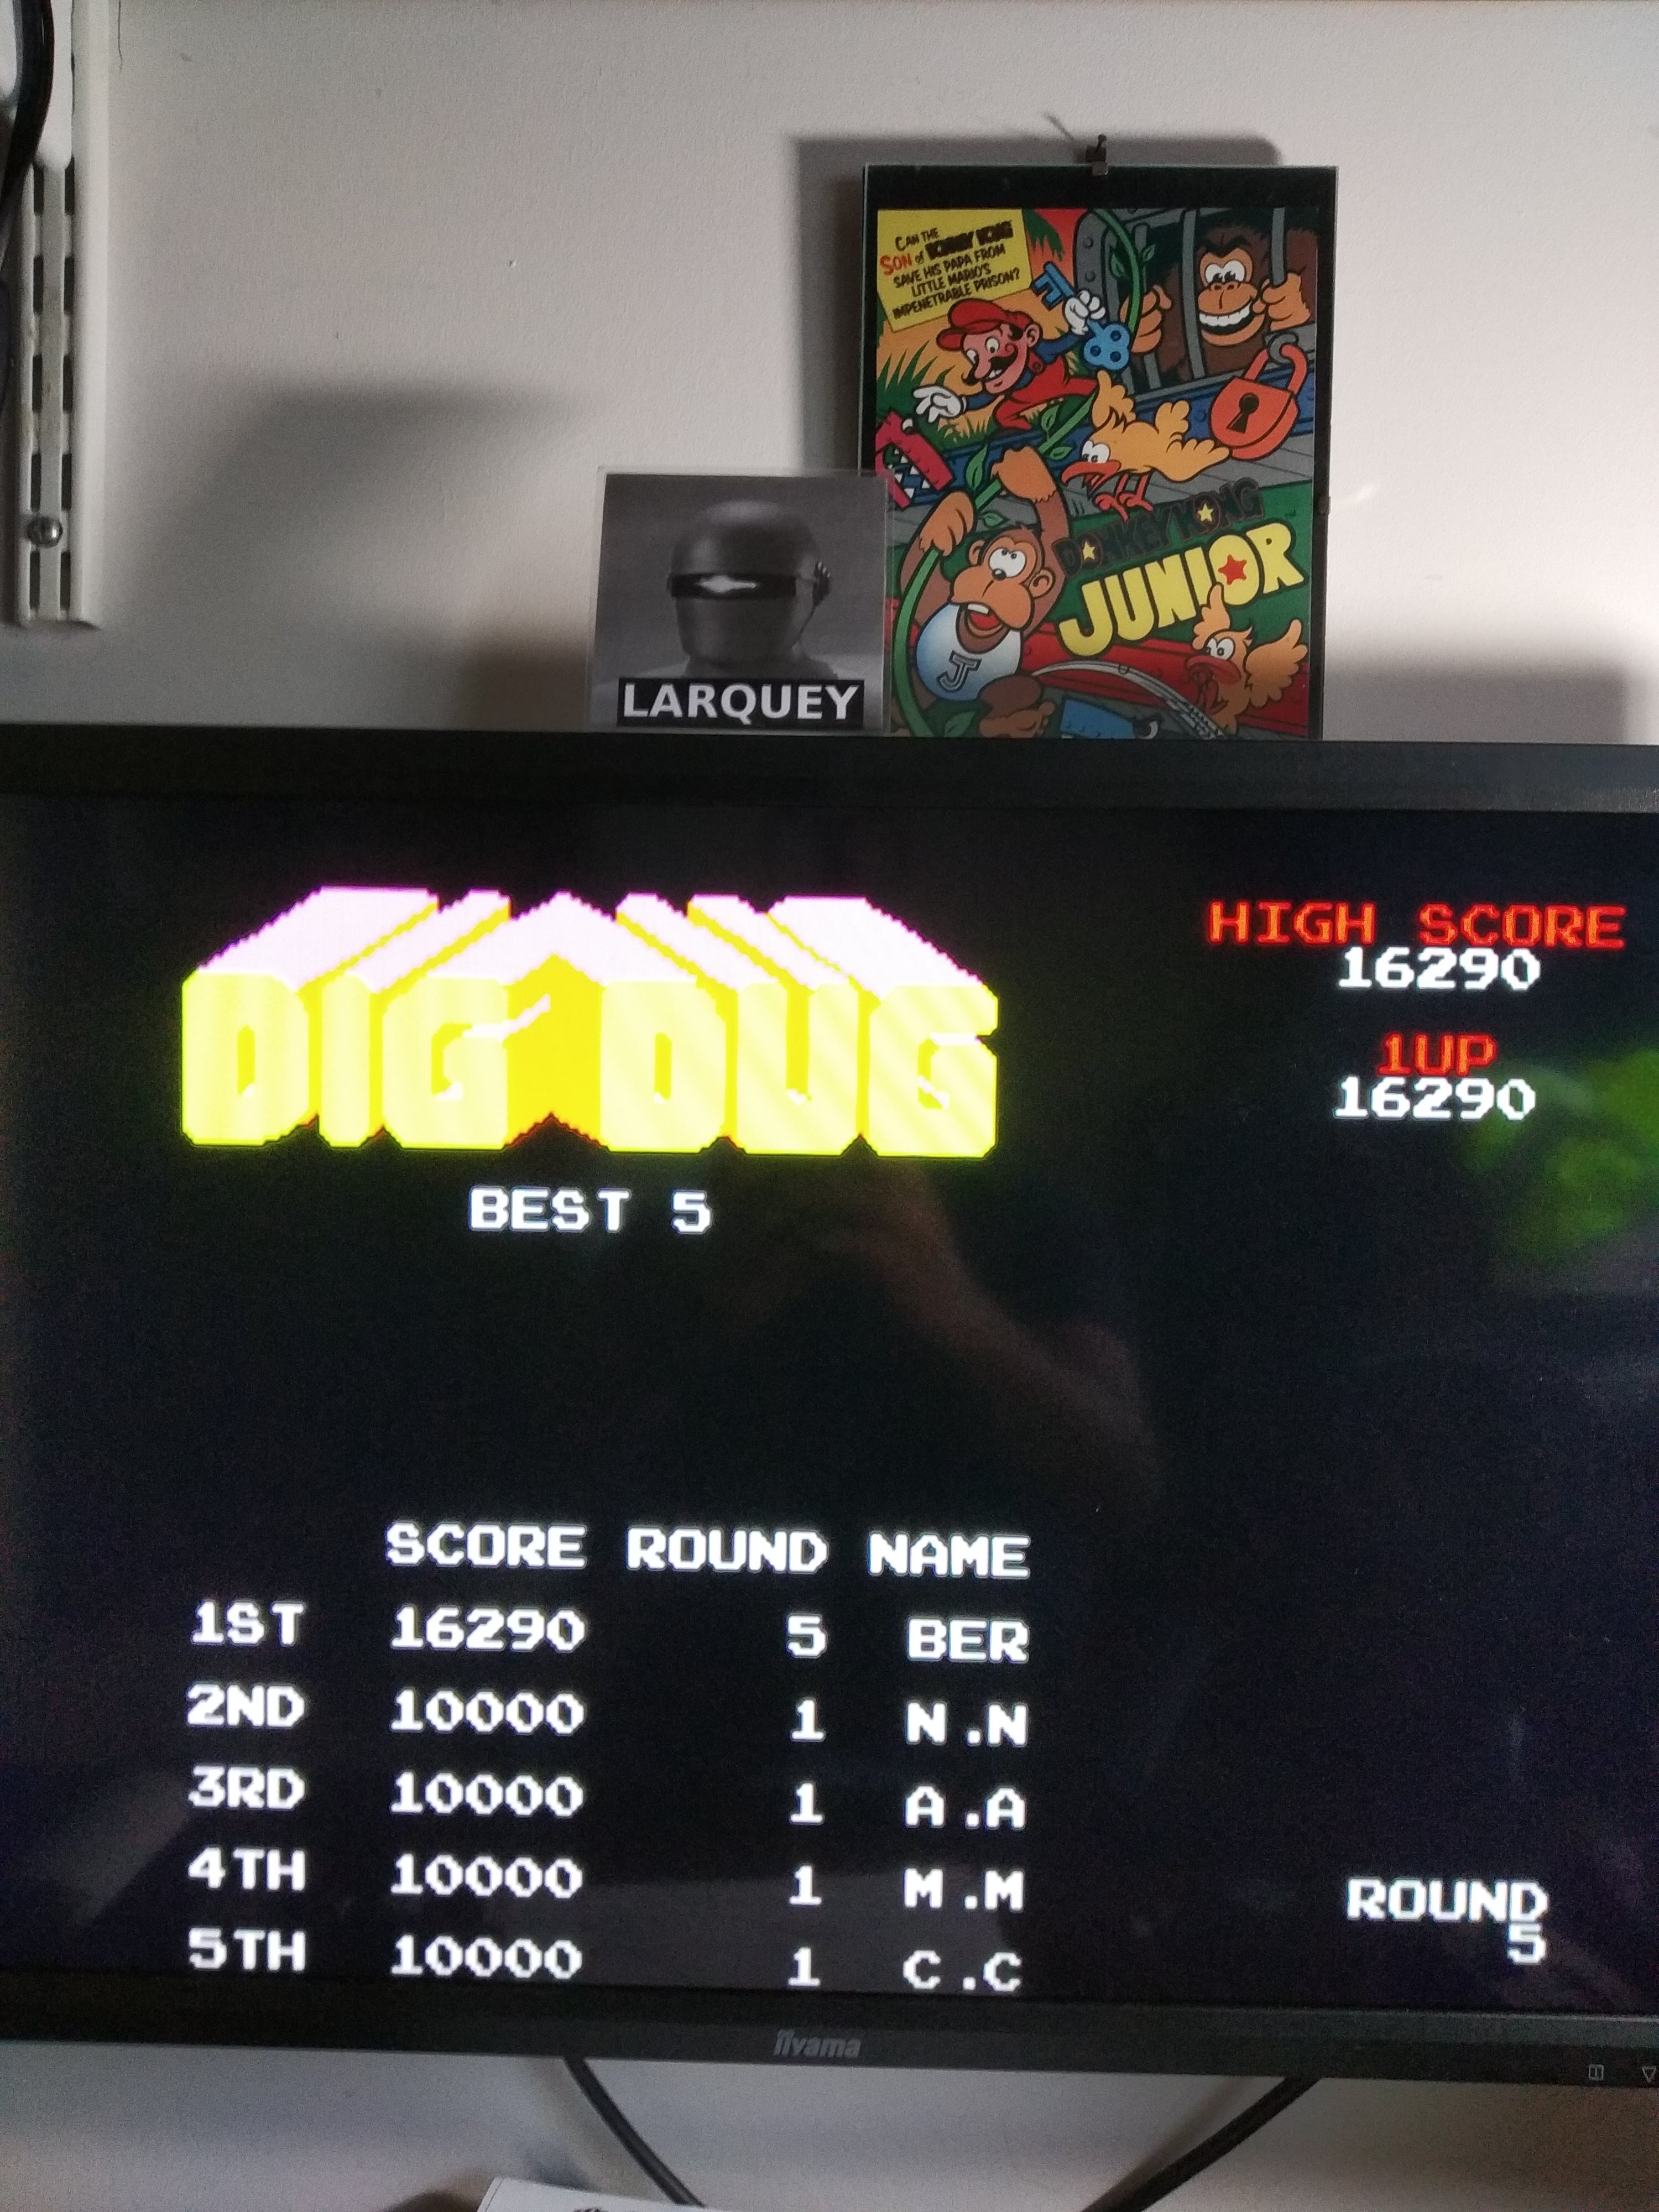 Larquey: Namco Museum: Dig Dug (Playstation 2 Emulated) 16,290 points on 2020-08-08 07:31:20